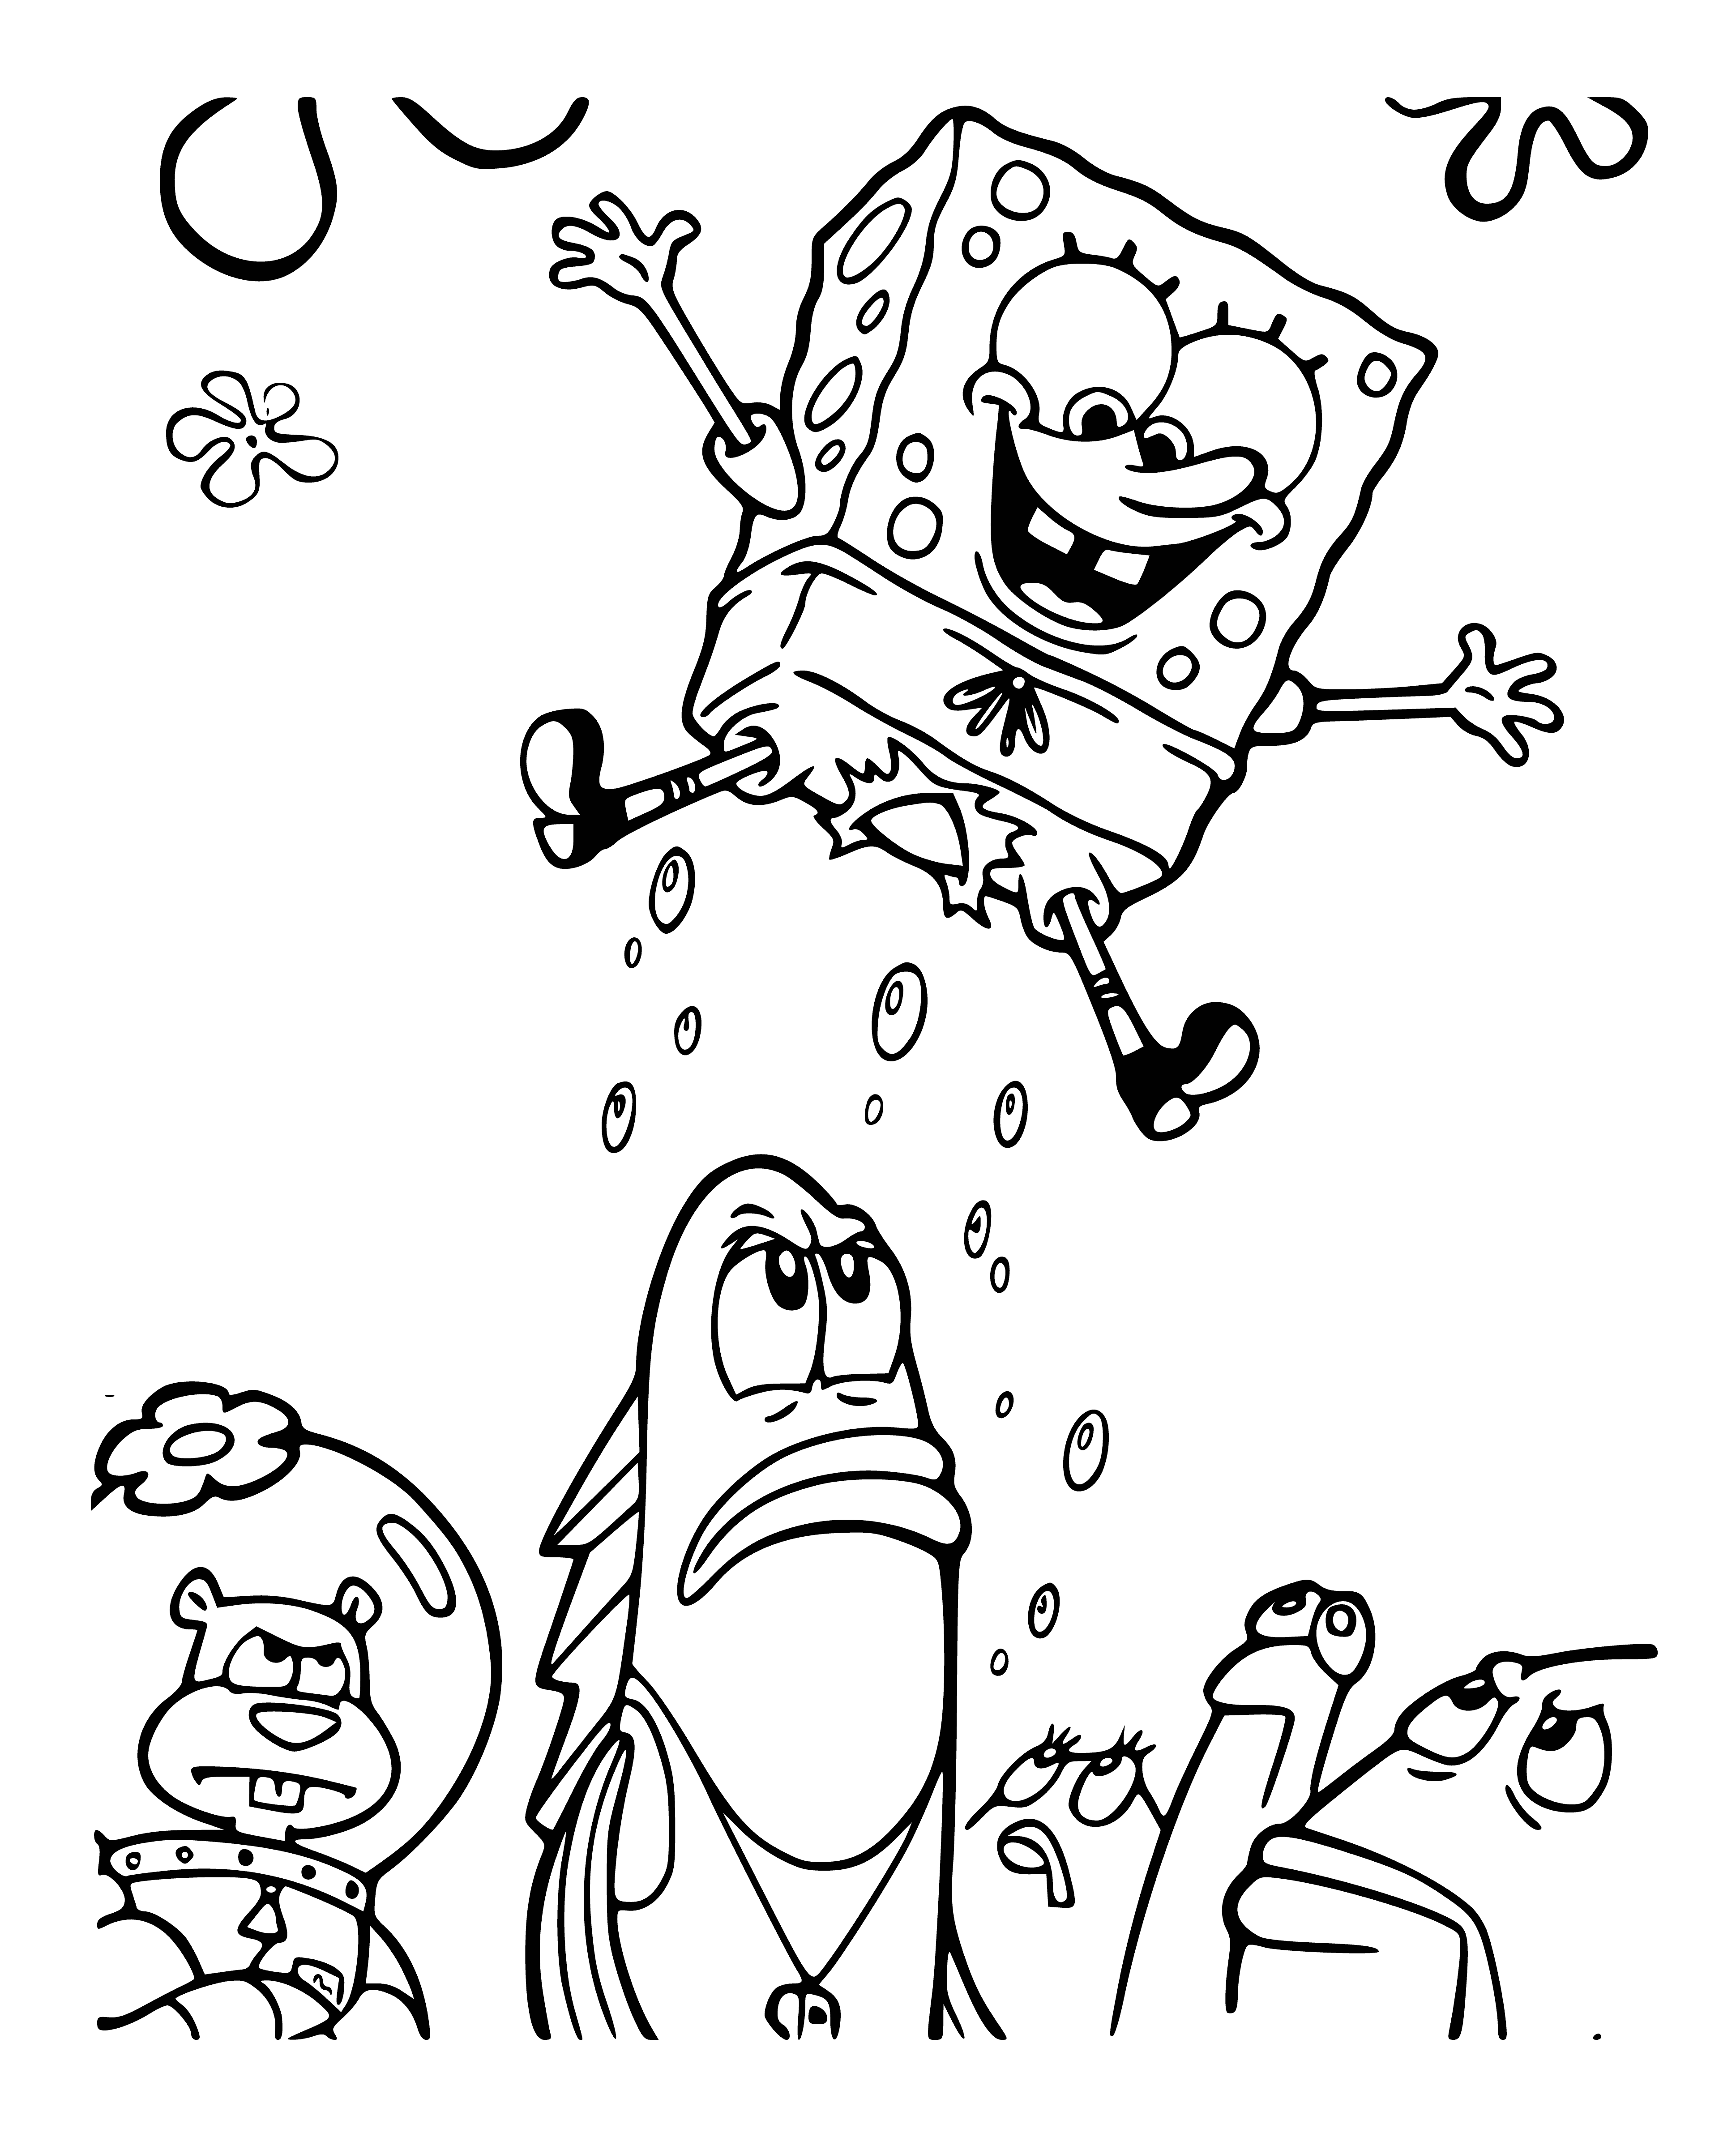 Like a rocket coloring page